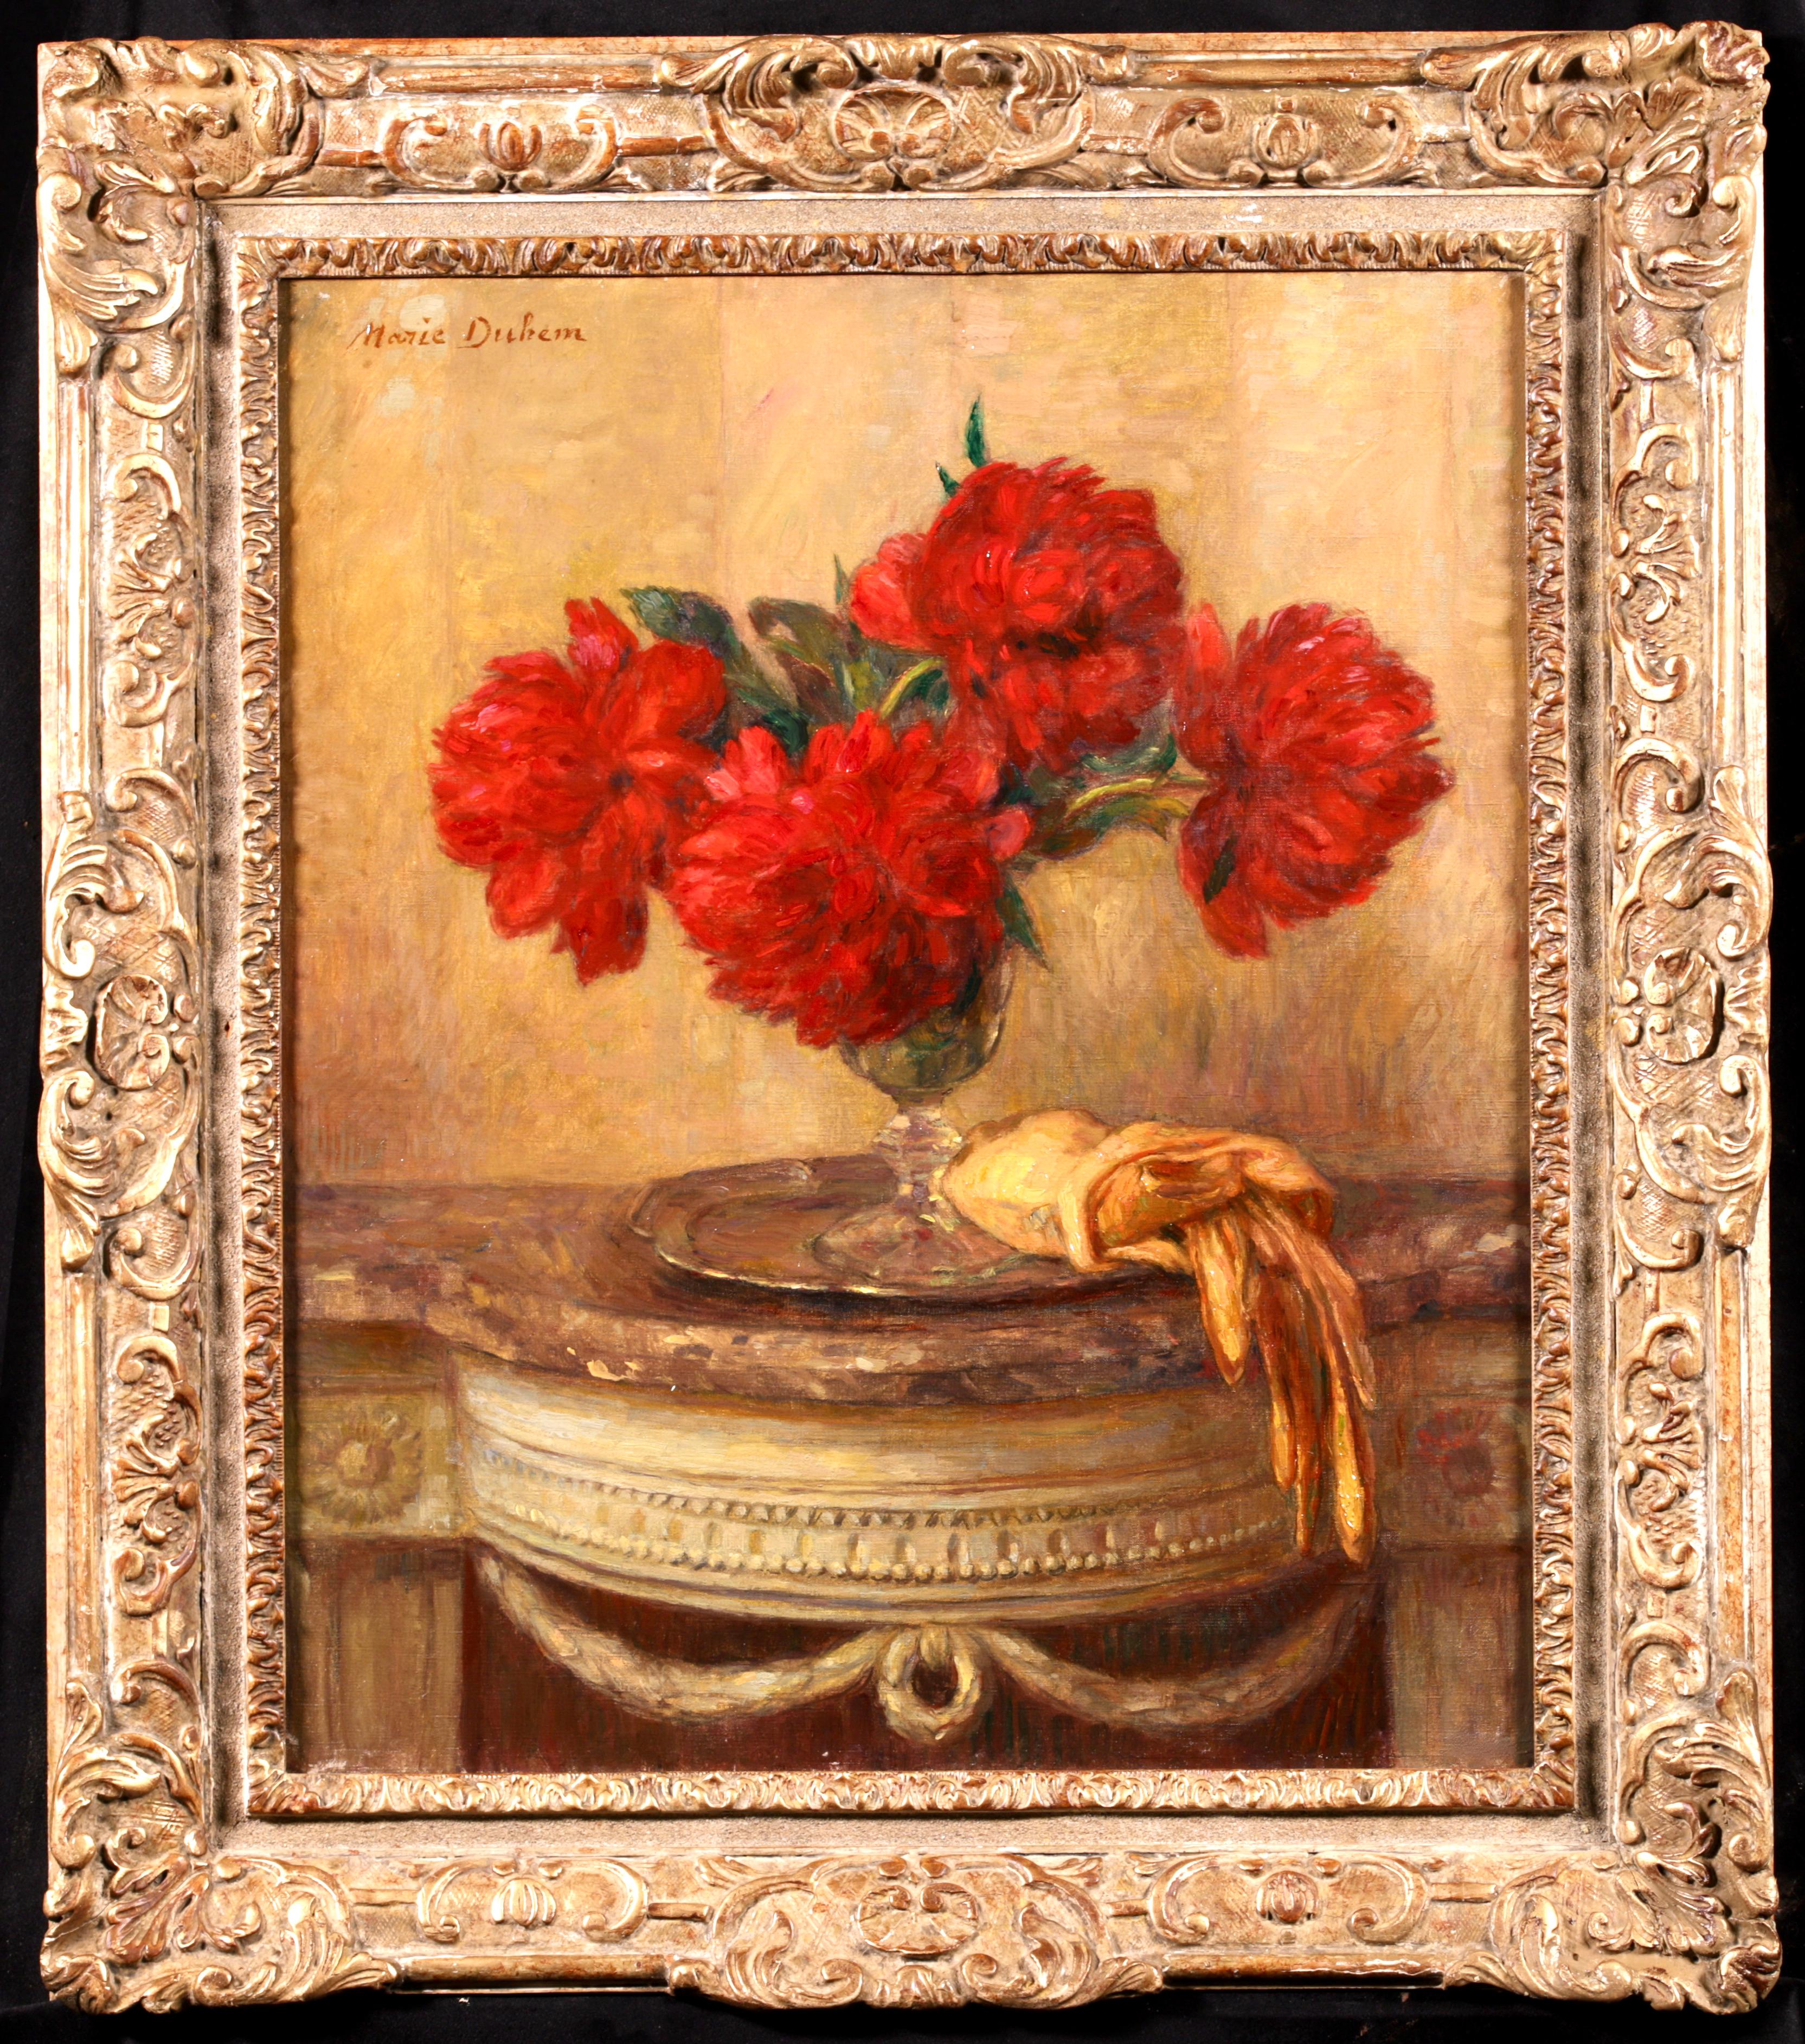 Signed and titled still life oil on canvas circa 1900 by French impressionist painter Marie Duhem. The work depicts red peonies in a glass vase which is sitting on a silver plate with yellow gloves placed beside it.

Signature
Signed upper left and